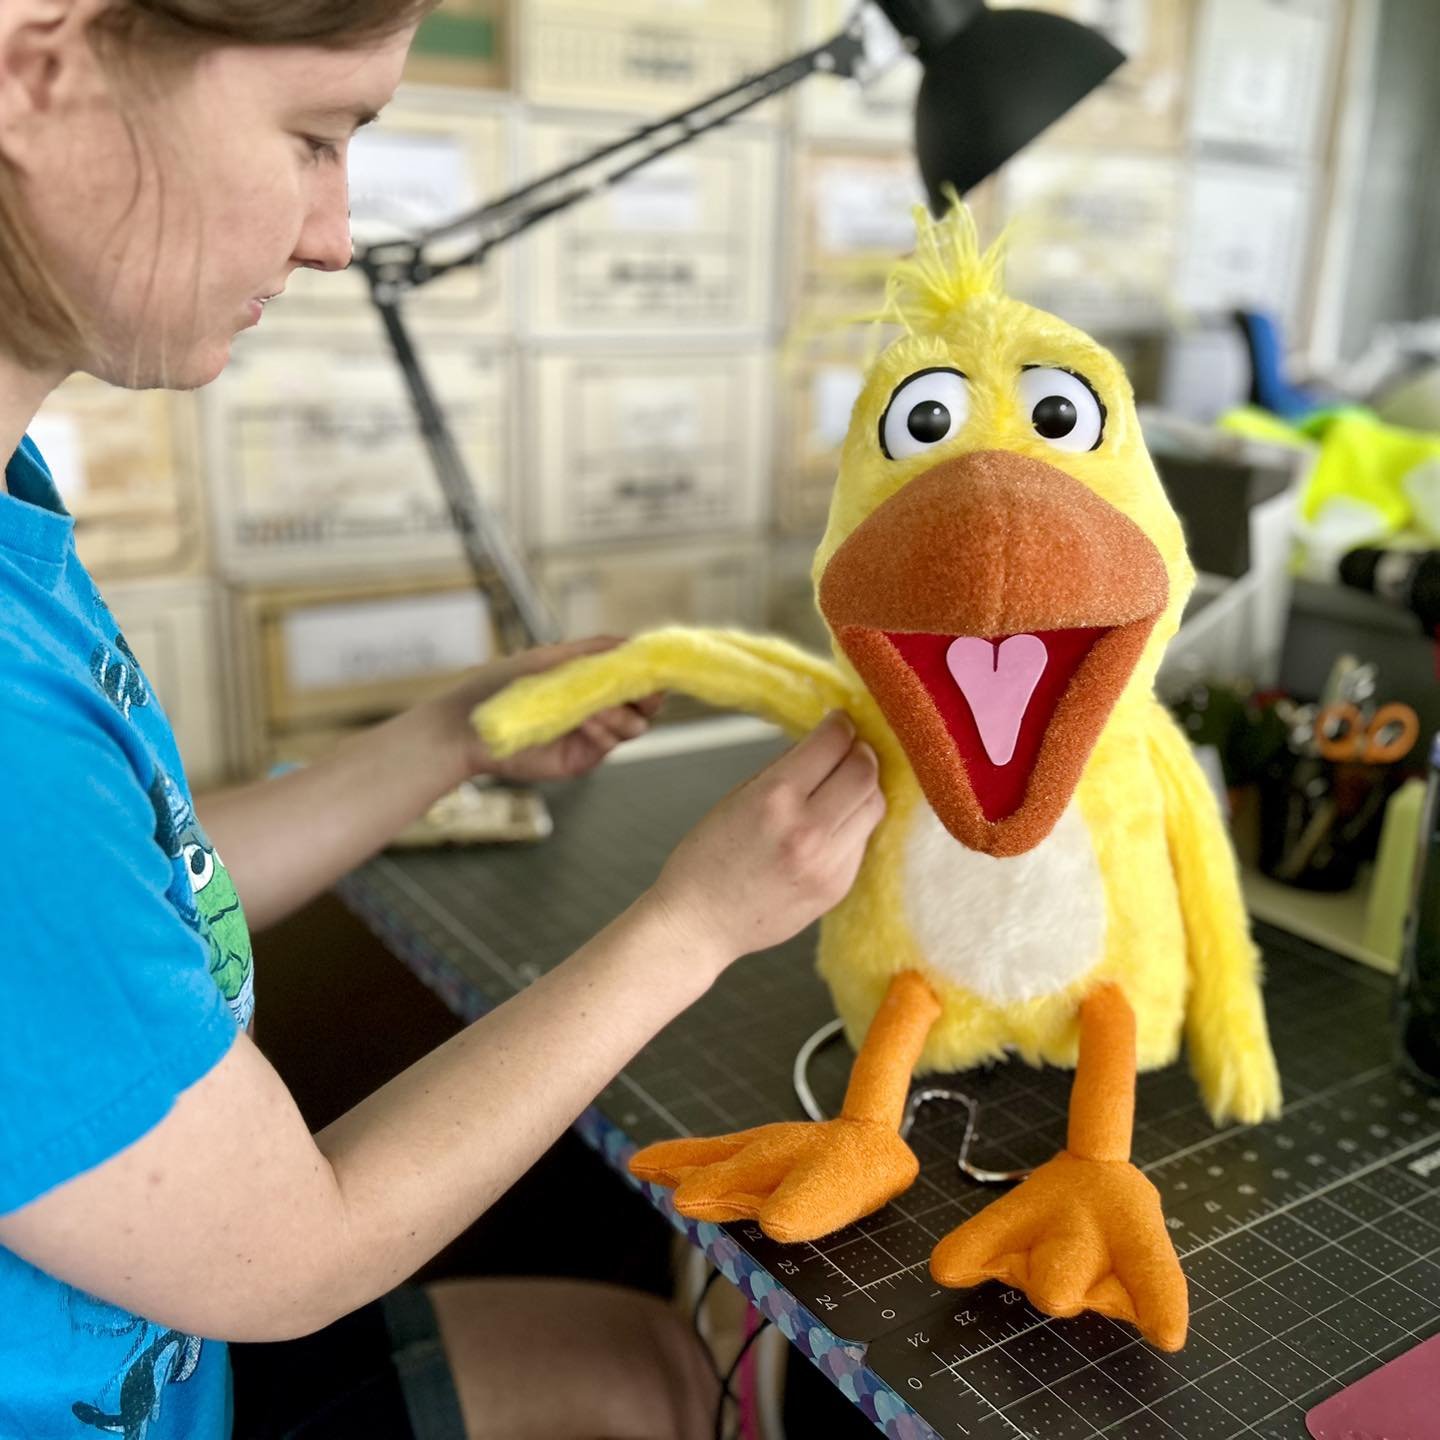 Dilly Duck is getting his final touches before he flys away to his new home! 🦆😊

#OneWay2 #duck #puppet #puppetry #puppetbuilder #puppetbuilding #creativearts #ministry #kidmin #resources